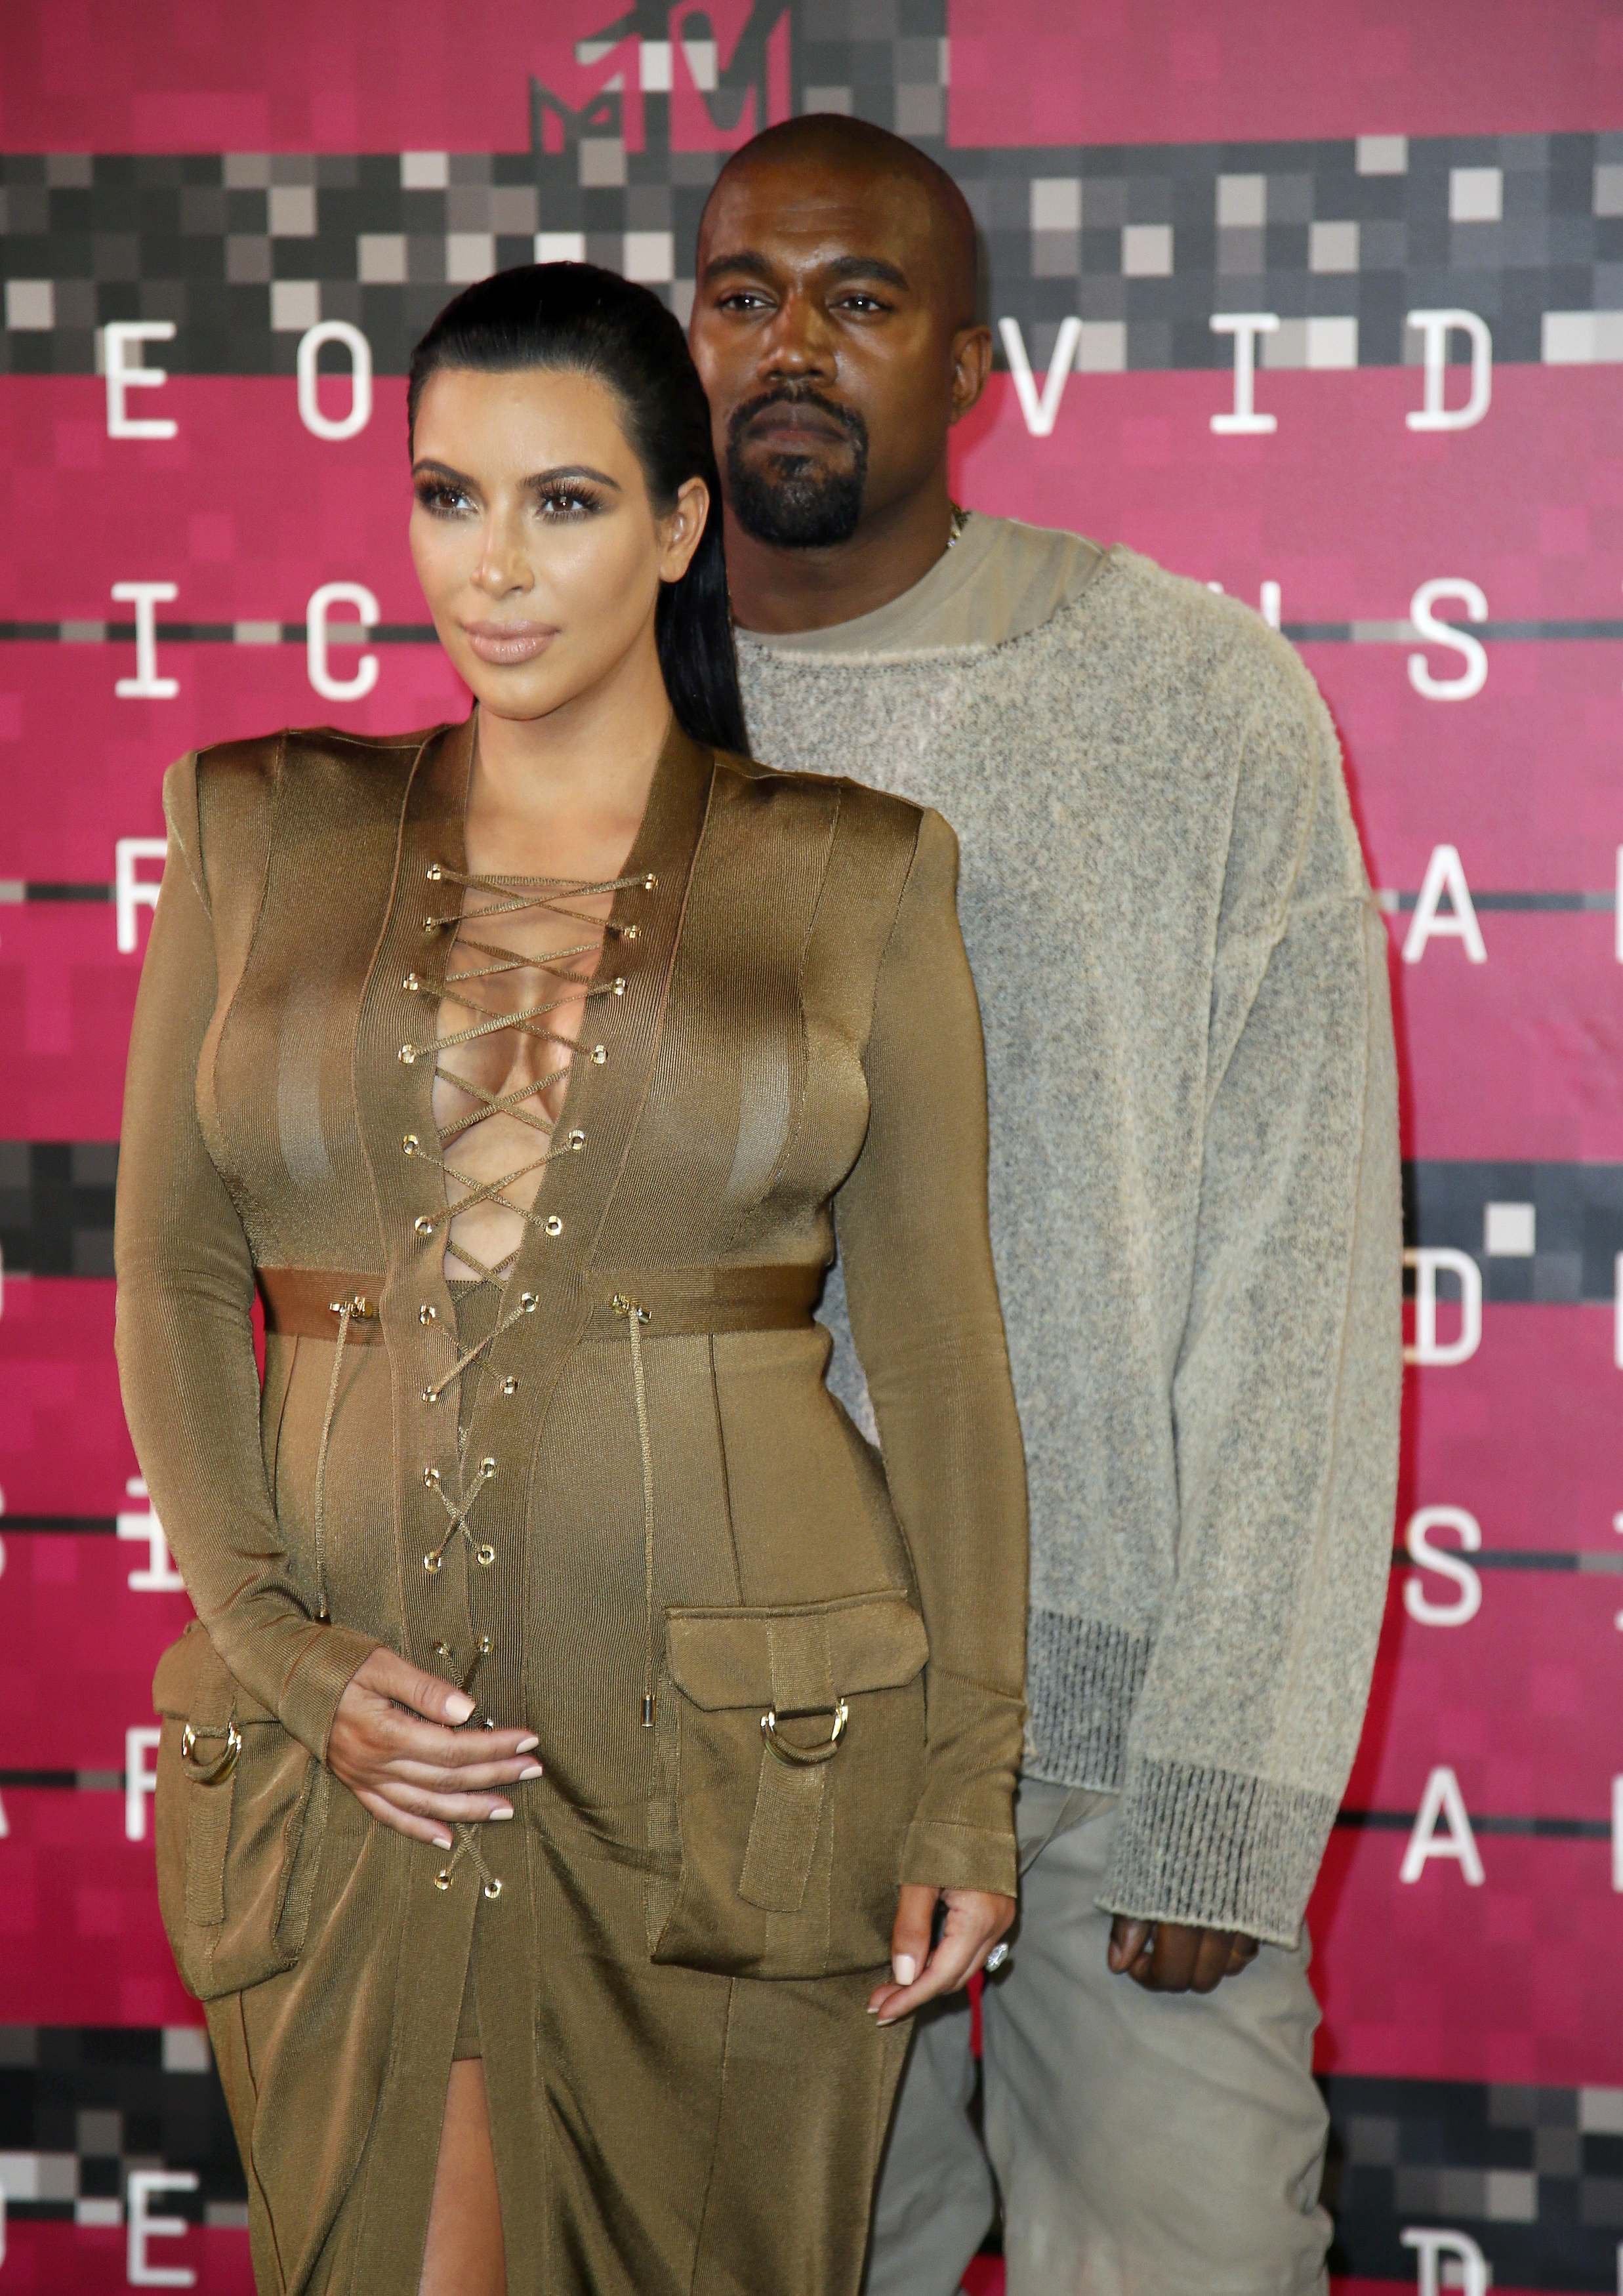 Kim and Kanye West posed at the MTV Video Music Awards in August 2015